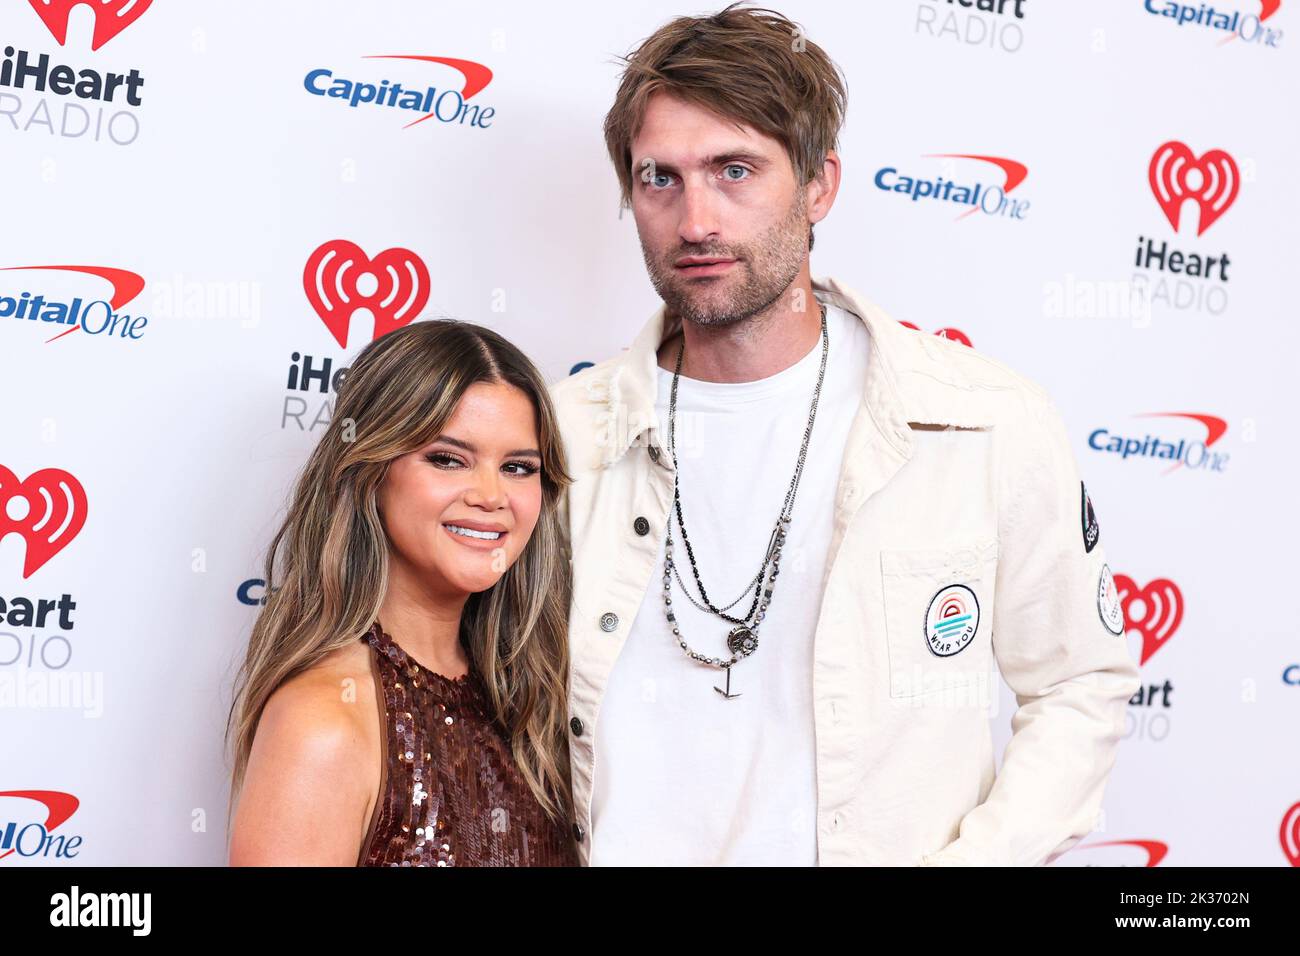 LAS VEGAS, NEVADA, USA - SEPTEMBER 24: Maren Morris and husband Ryan Hurd pose in the press room at the 2022 iHeartRadio Music Festival - Night 2 held at the T-Mobile Arena on September 24, 2022 in Las Vegas, Nevada, United States. (Photo by Xavier Collin/Image Press Agency) Stock Photo